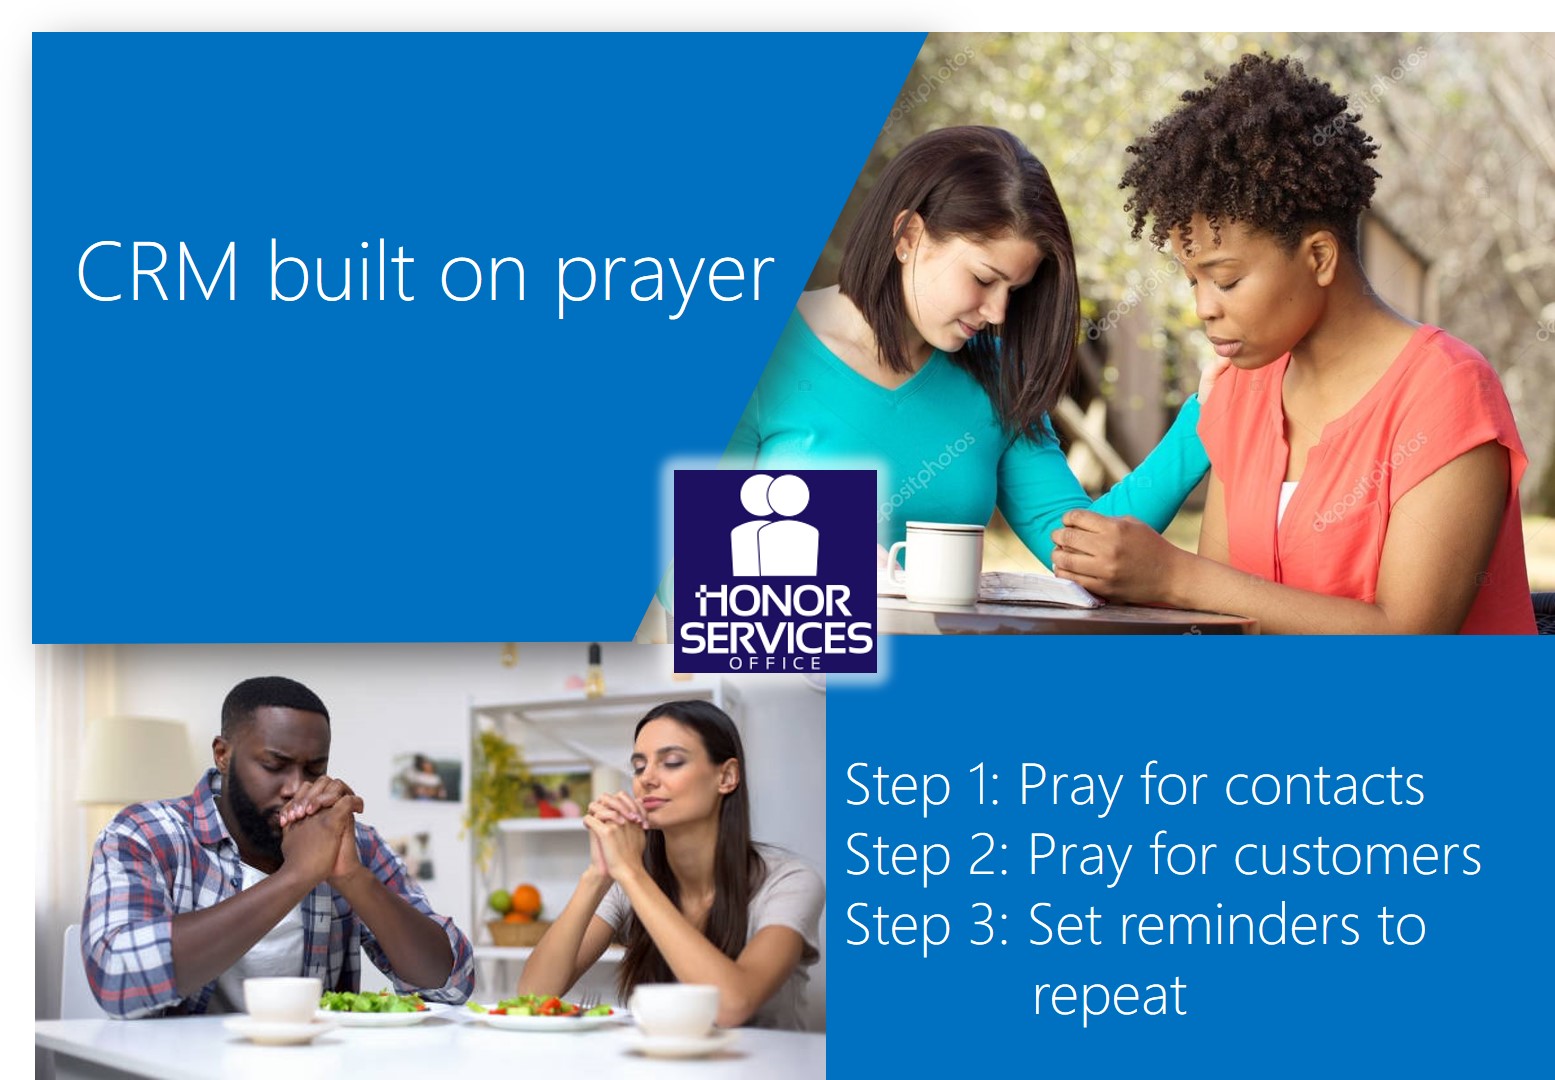 Honor Services Office CRM built on Prayer